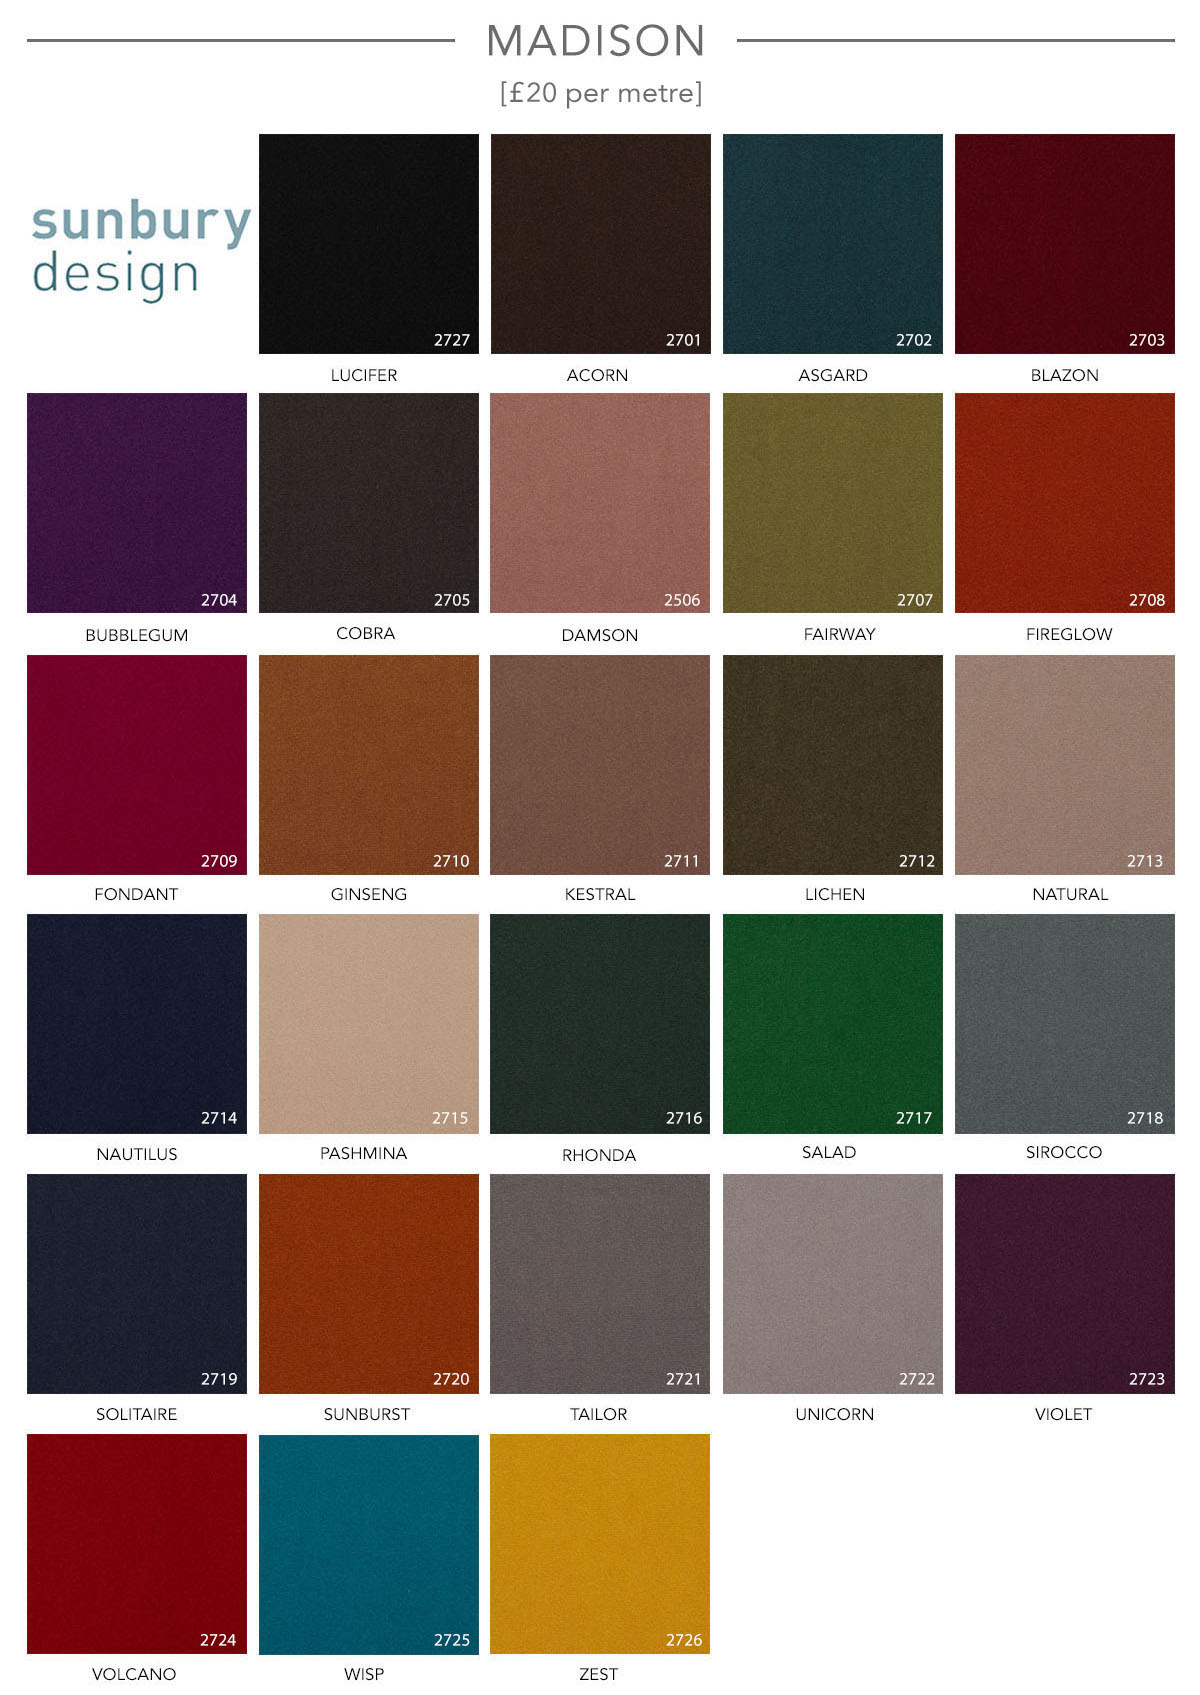 221207_madison_fabric_swatches_with_codes_2023_copy-min.jpg